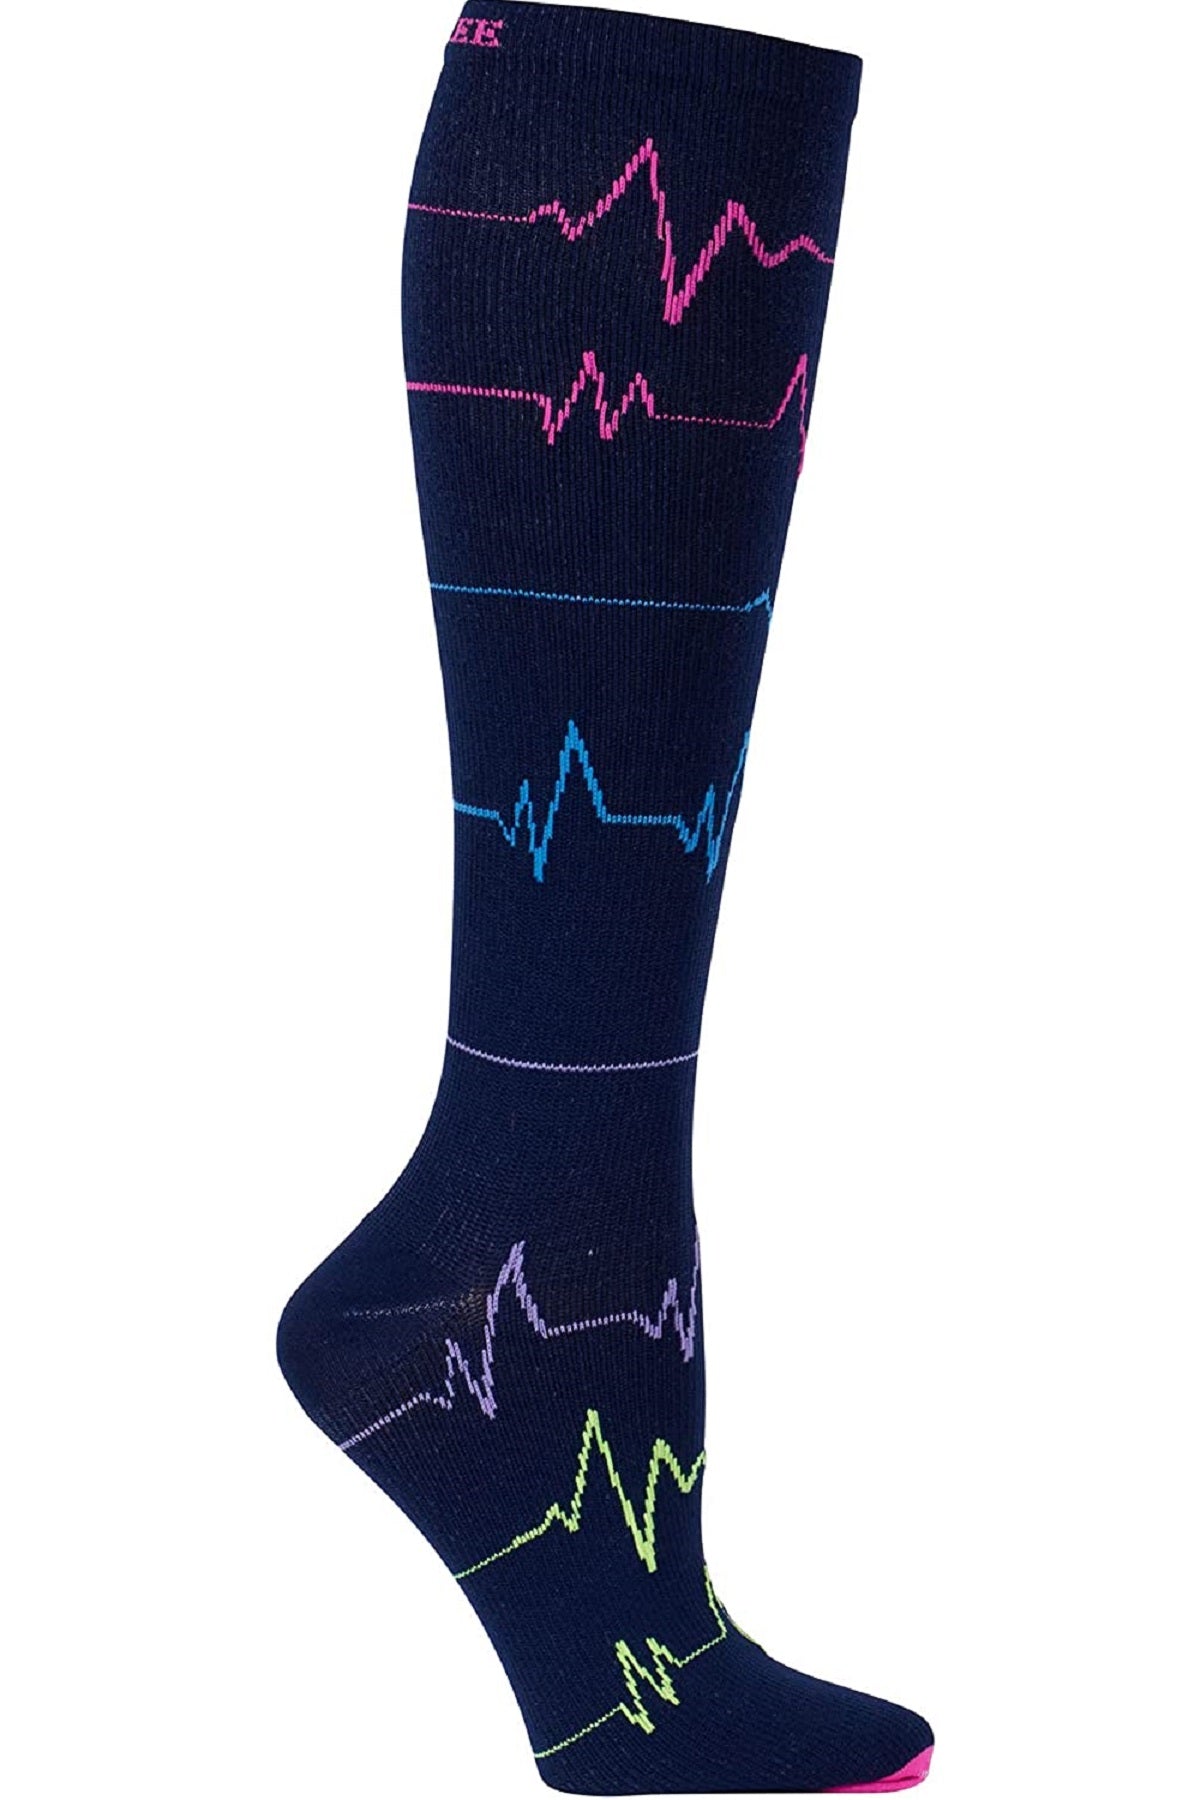 Cherokee Plus Print Support Mild Compression Socks Wide Calf 8-12 mmHg EKG Zig Zag at Parker's Clothing and Shoes.